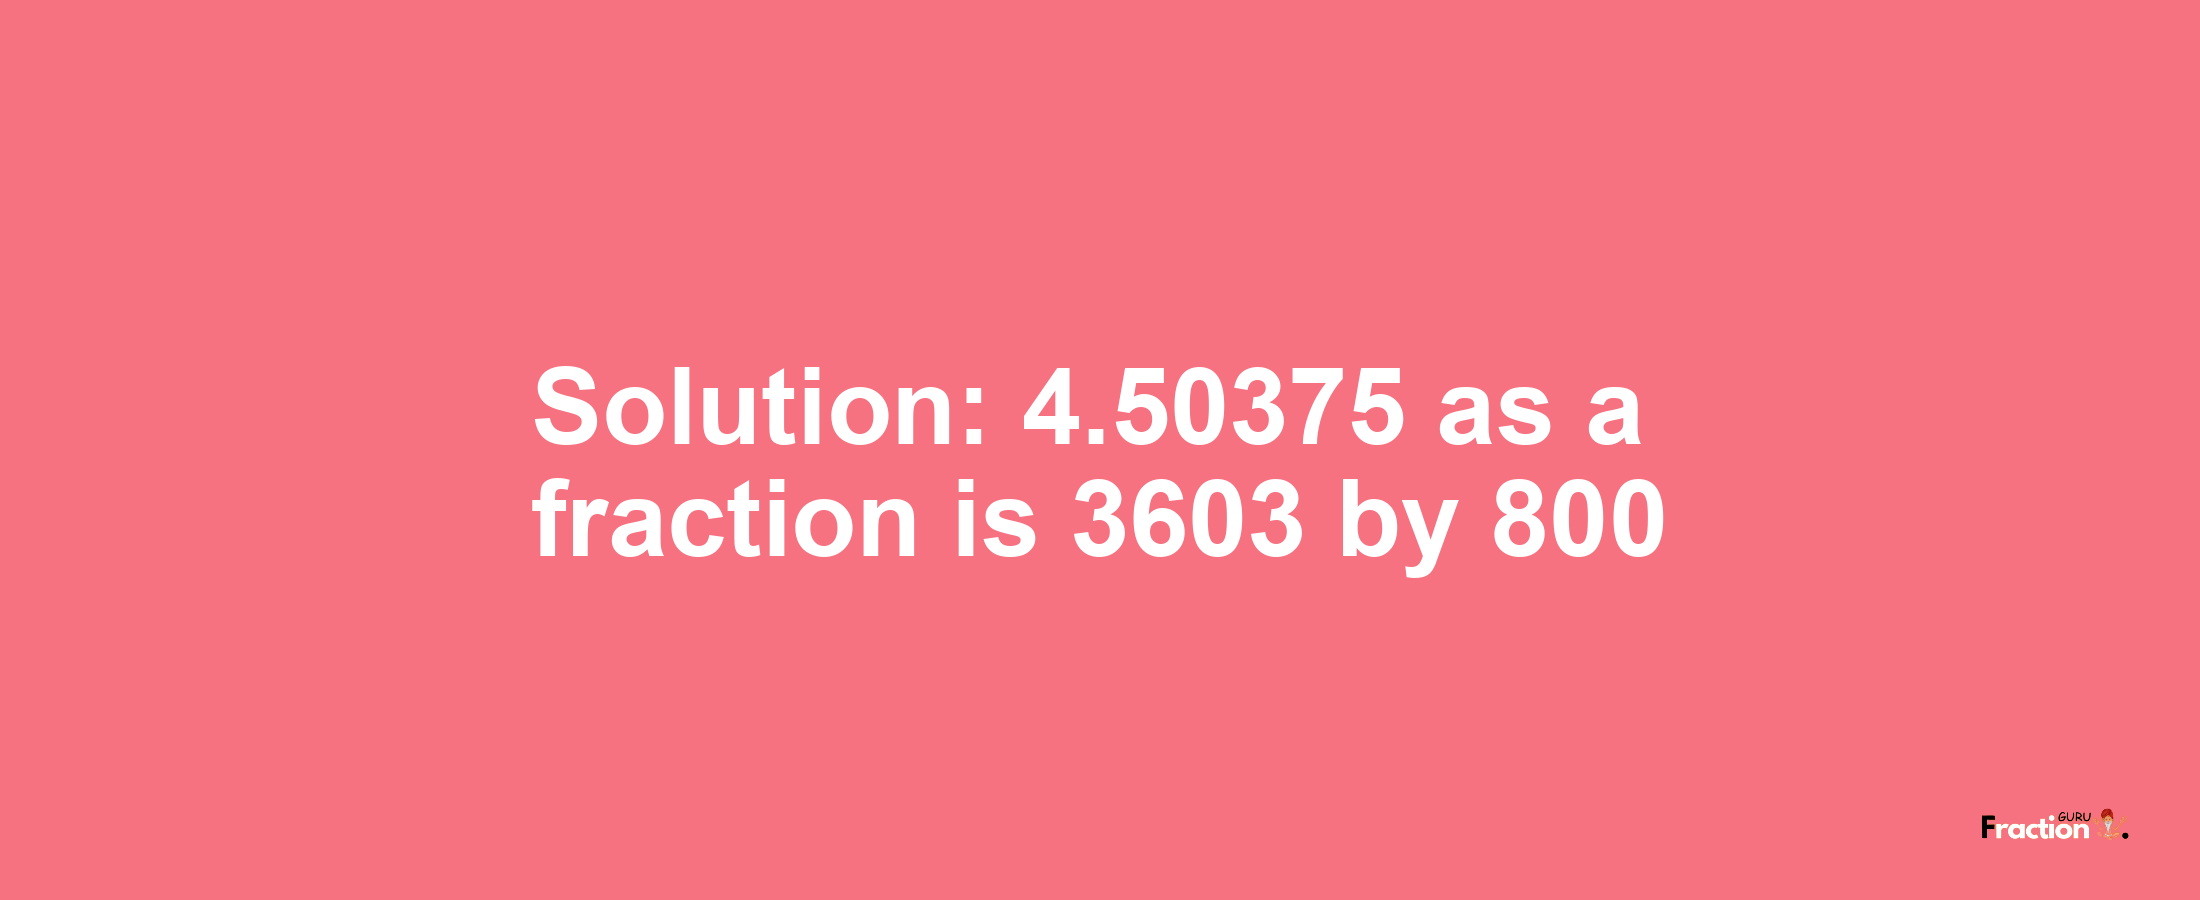 Solution:4.50375 as a fraction is 3603/800